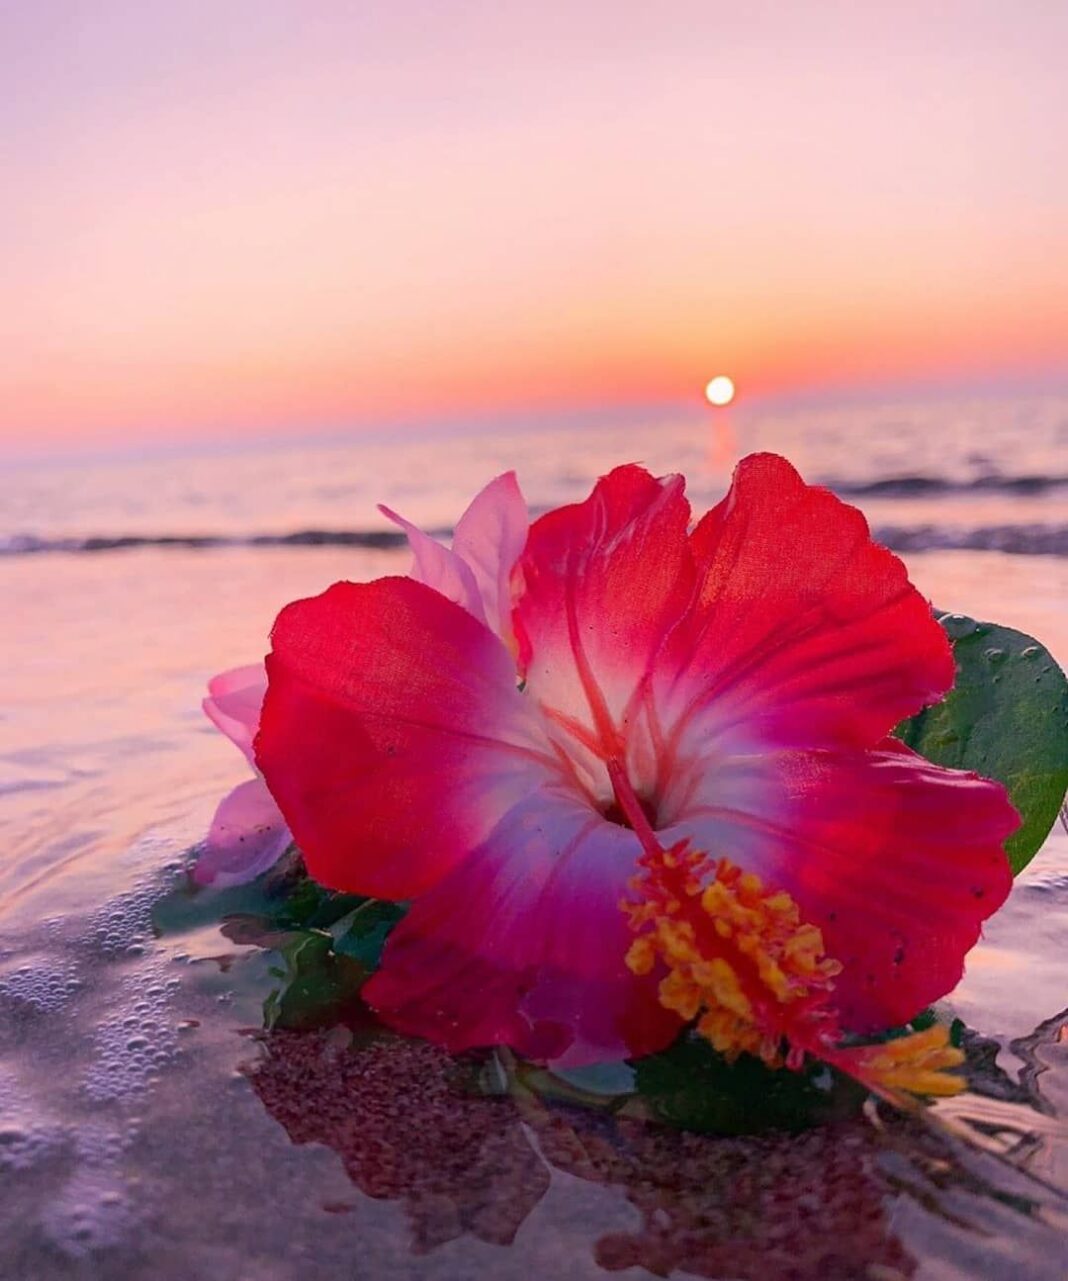 ocean-flowers-blooms-of-beauty-and-vitality this blog is very charming and alluring about ocean flowers.